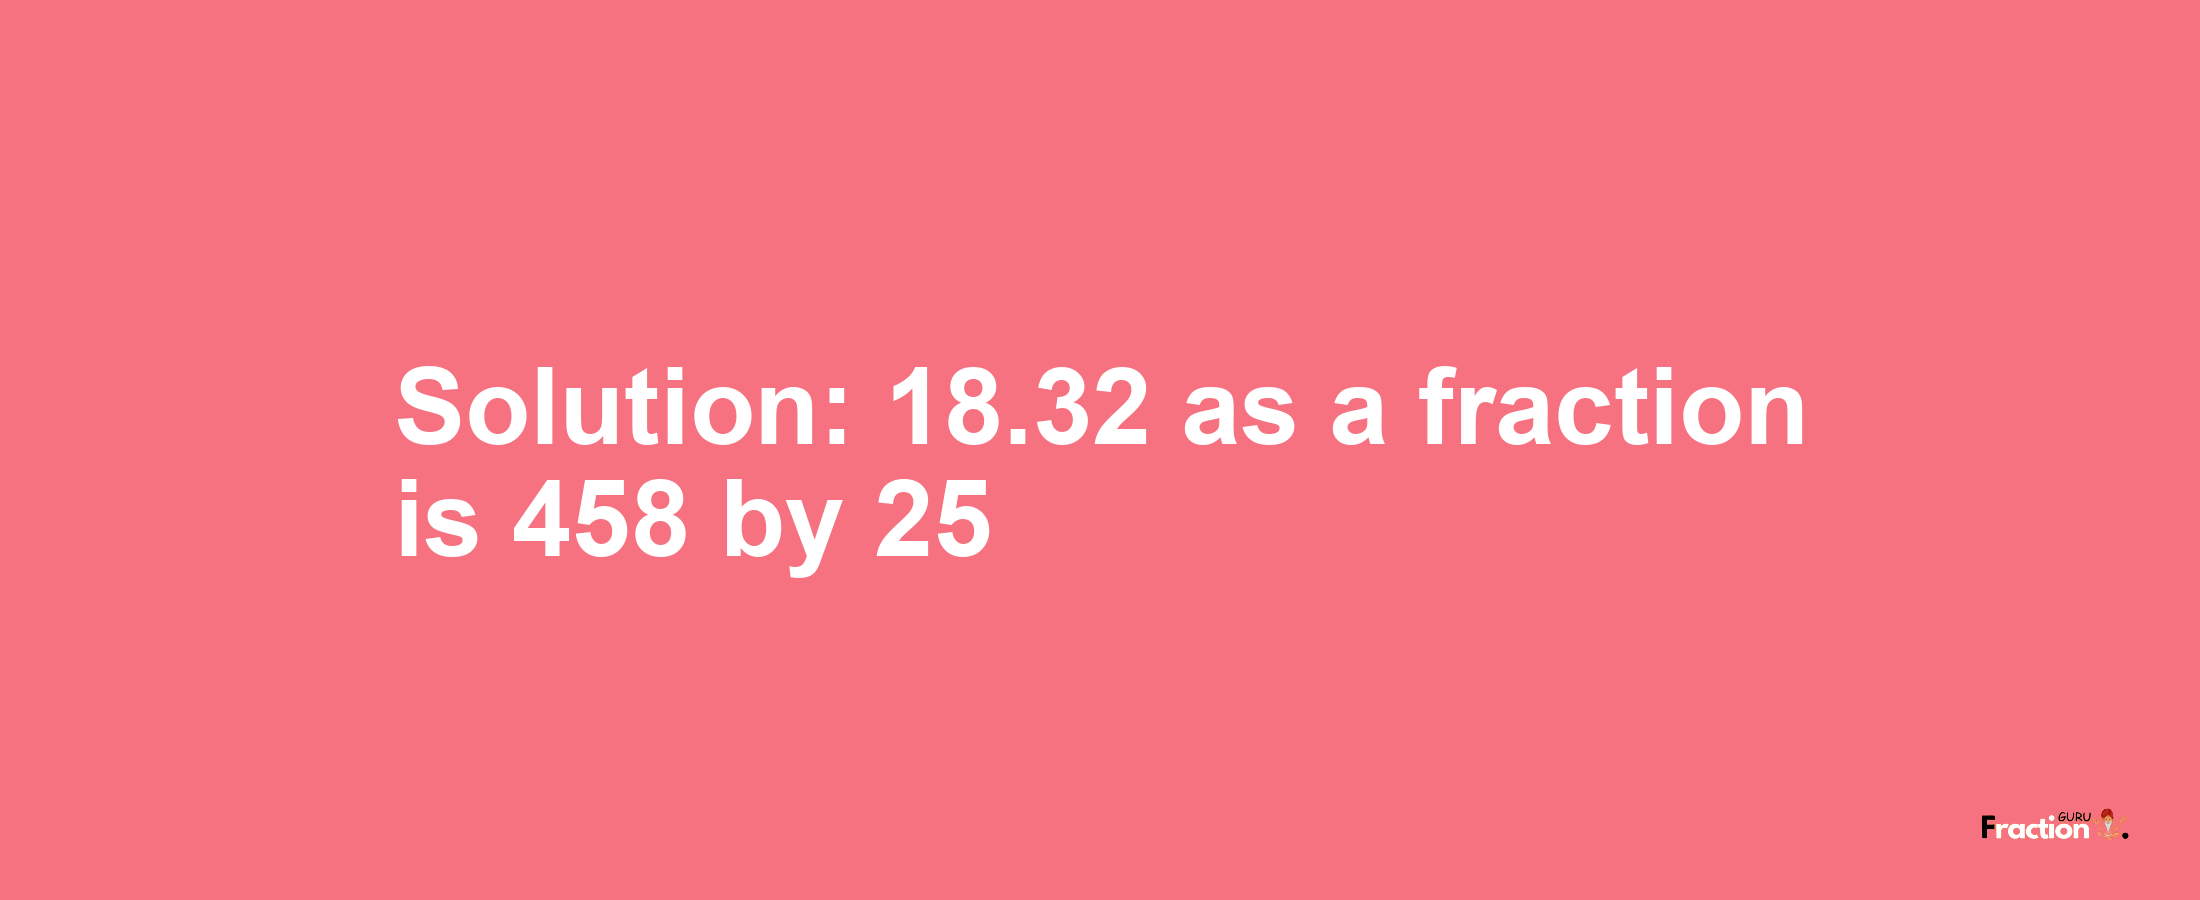 Solution:18.32 as a fraction is 458/25